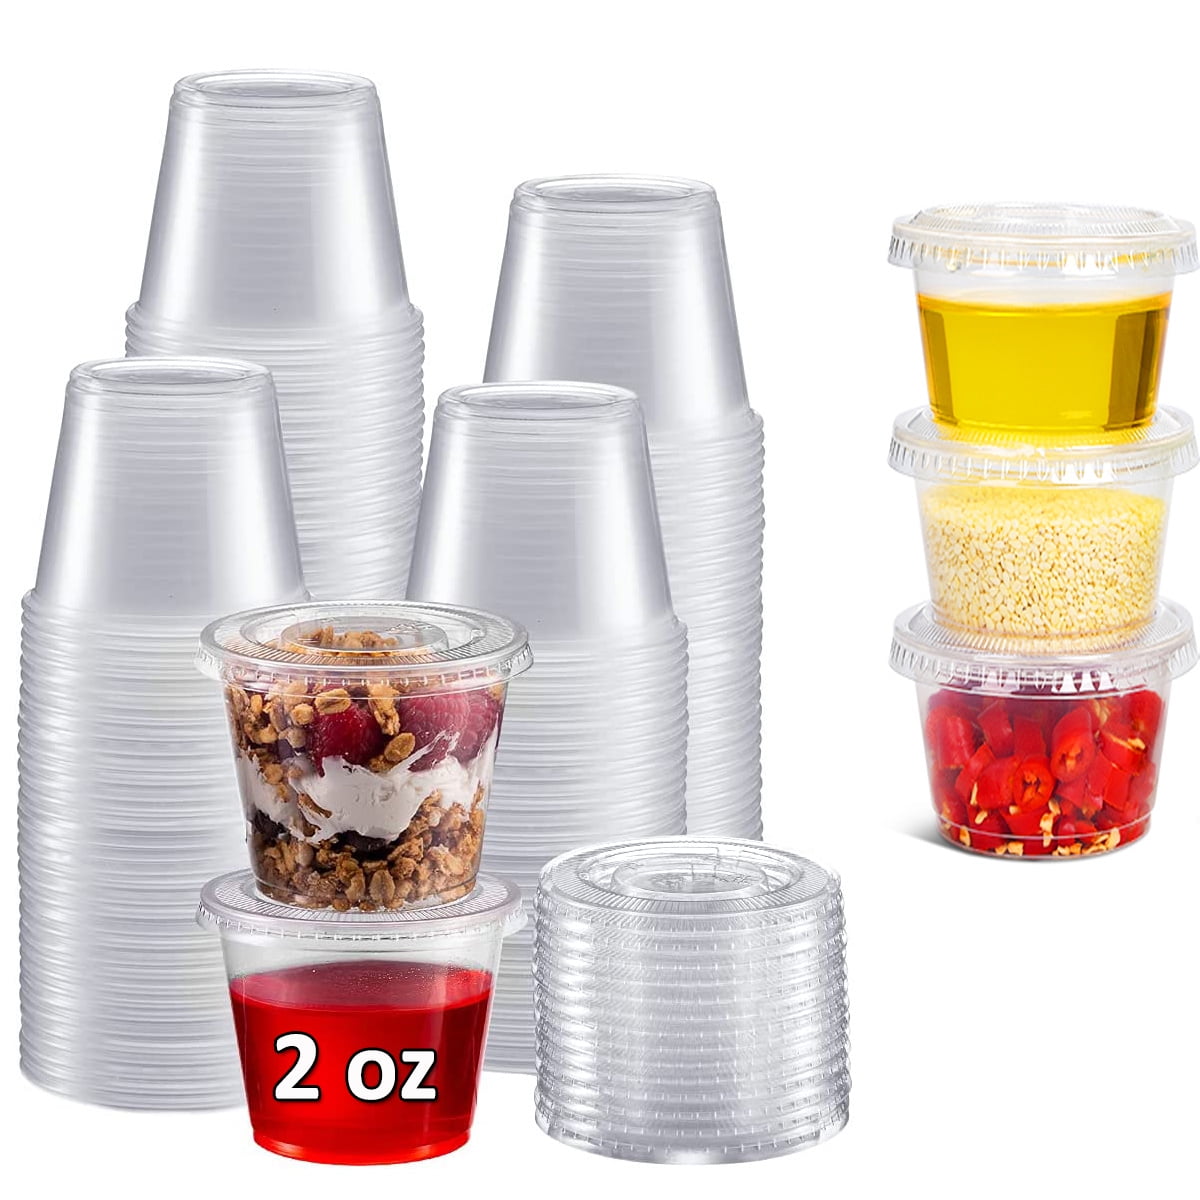 [6 Pack] Stainless Steel Meal Prep Cups - Freezable Juice & Smoothie Jars  with Lids - Convenient Smo…See more [6 Pack] Stainless Steel Meal Prep Cups